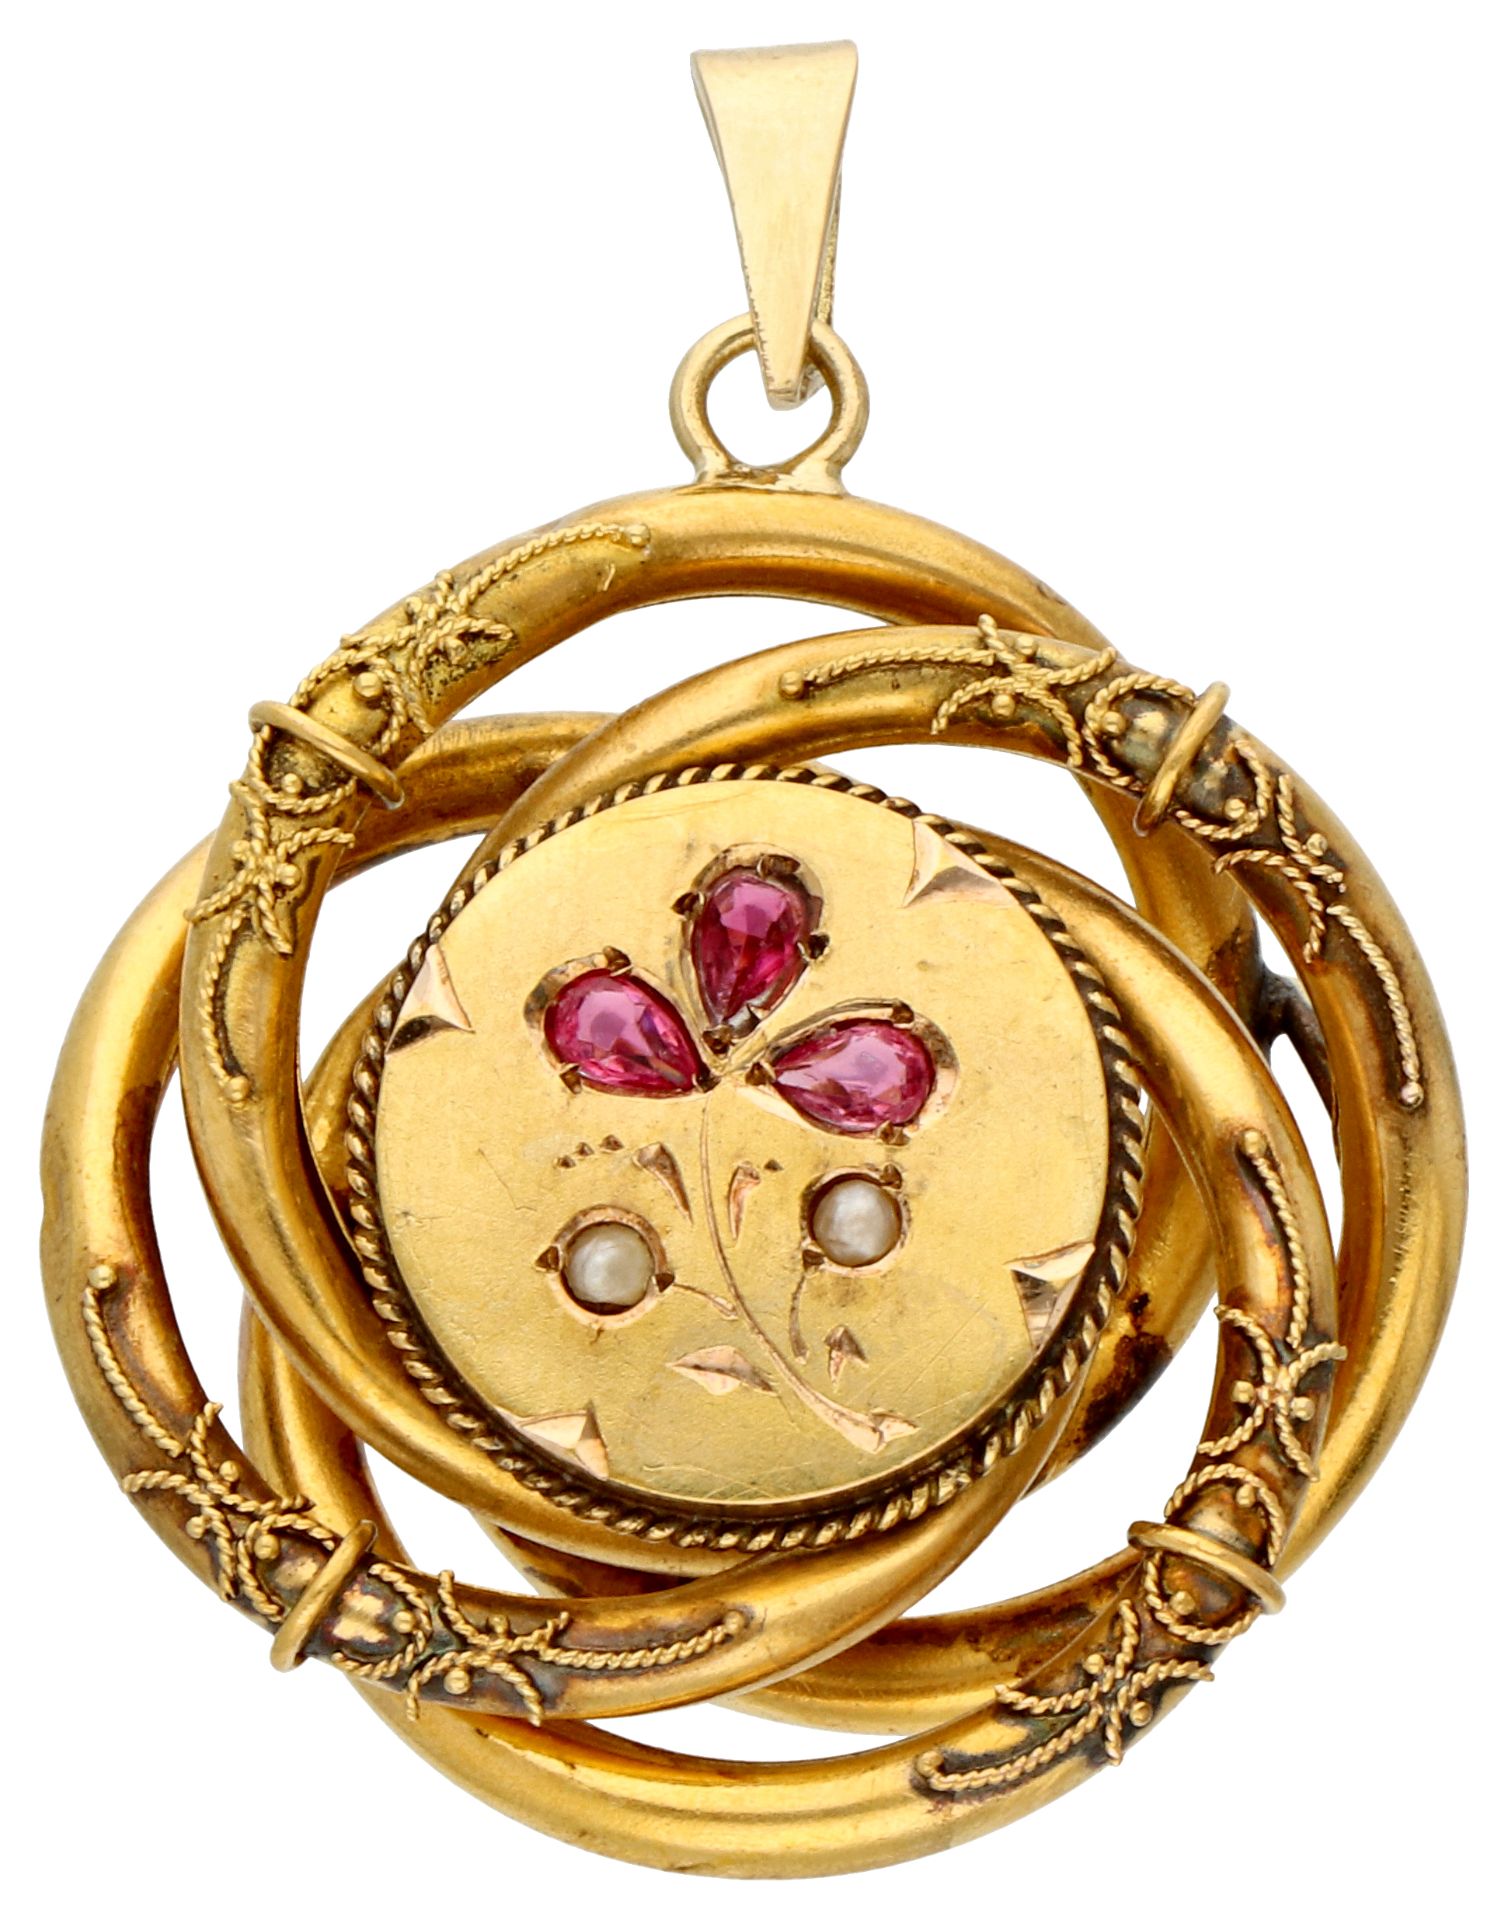 No Reserve - 14K Yellow gold antique pendant set with coloured stones and imitation seed pearls.